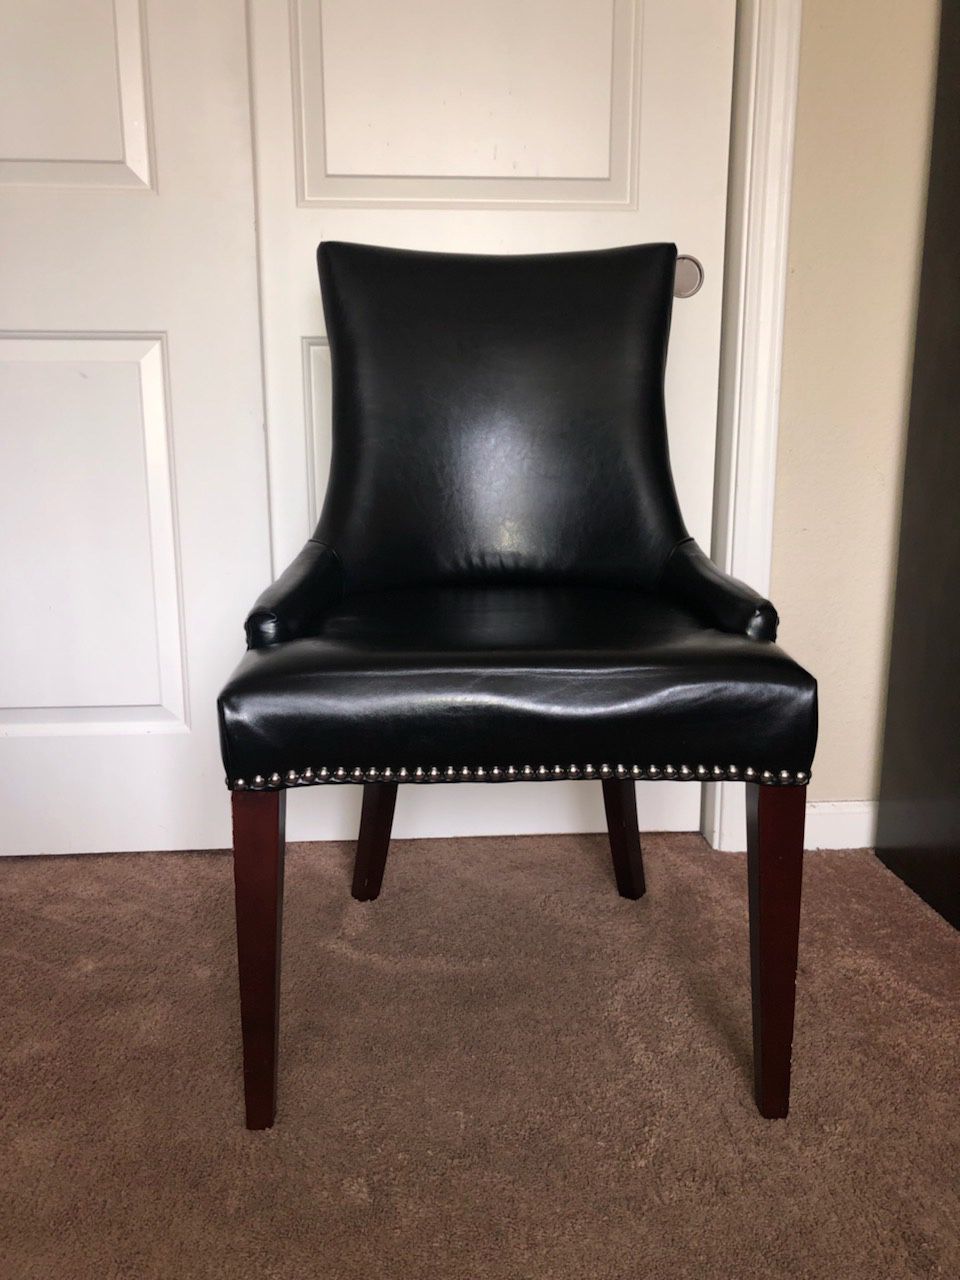 Black Faux Leather Chair w/Studs